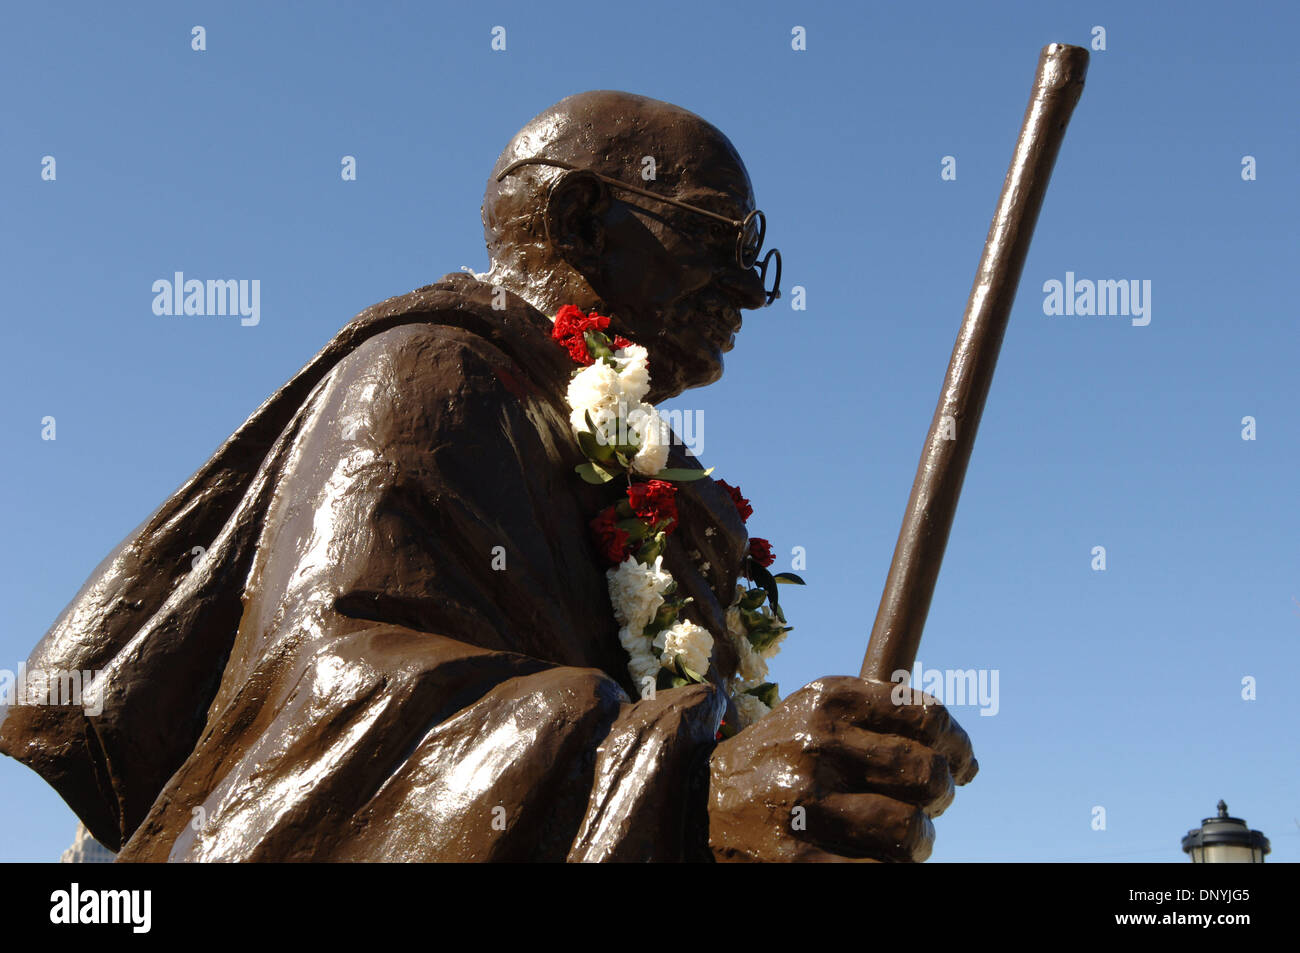 Jan 31, 2006; Atlanta, GA, USA; Flowers on Ghandi statue at King Center, Atlanta, to honor Coretta Scott King on Jan. 31, 2006. Coretta Scott King died on Jan. 30 in her sleep at a Mexican rehabilitation center where she was undergoing holistic therapy for a stroke. Mandatory Credit: Photo by Robin Nelson/ZUMA Press. (©) Copyright 2006 by Robin Nelson Stock Photo